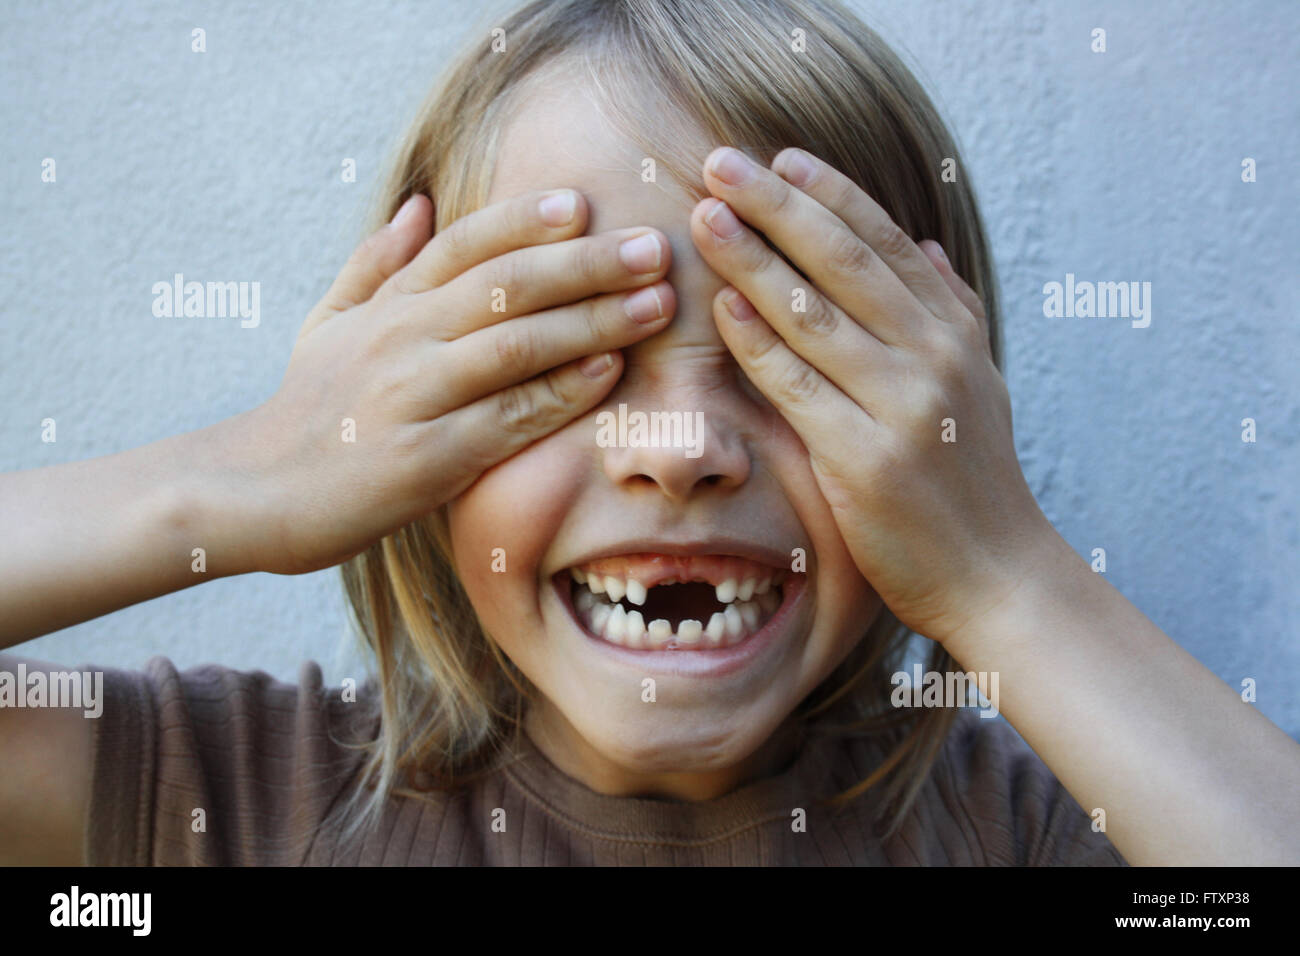 Boy with gap toothed smile with hands covering eyes Stock Photo